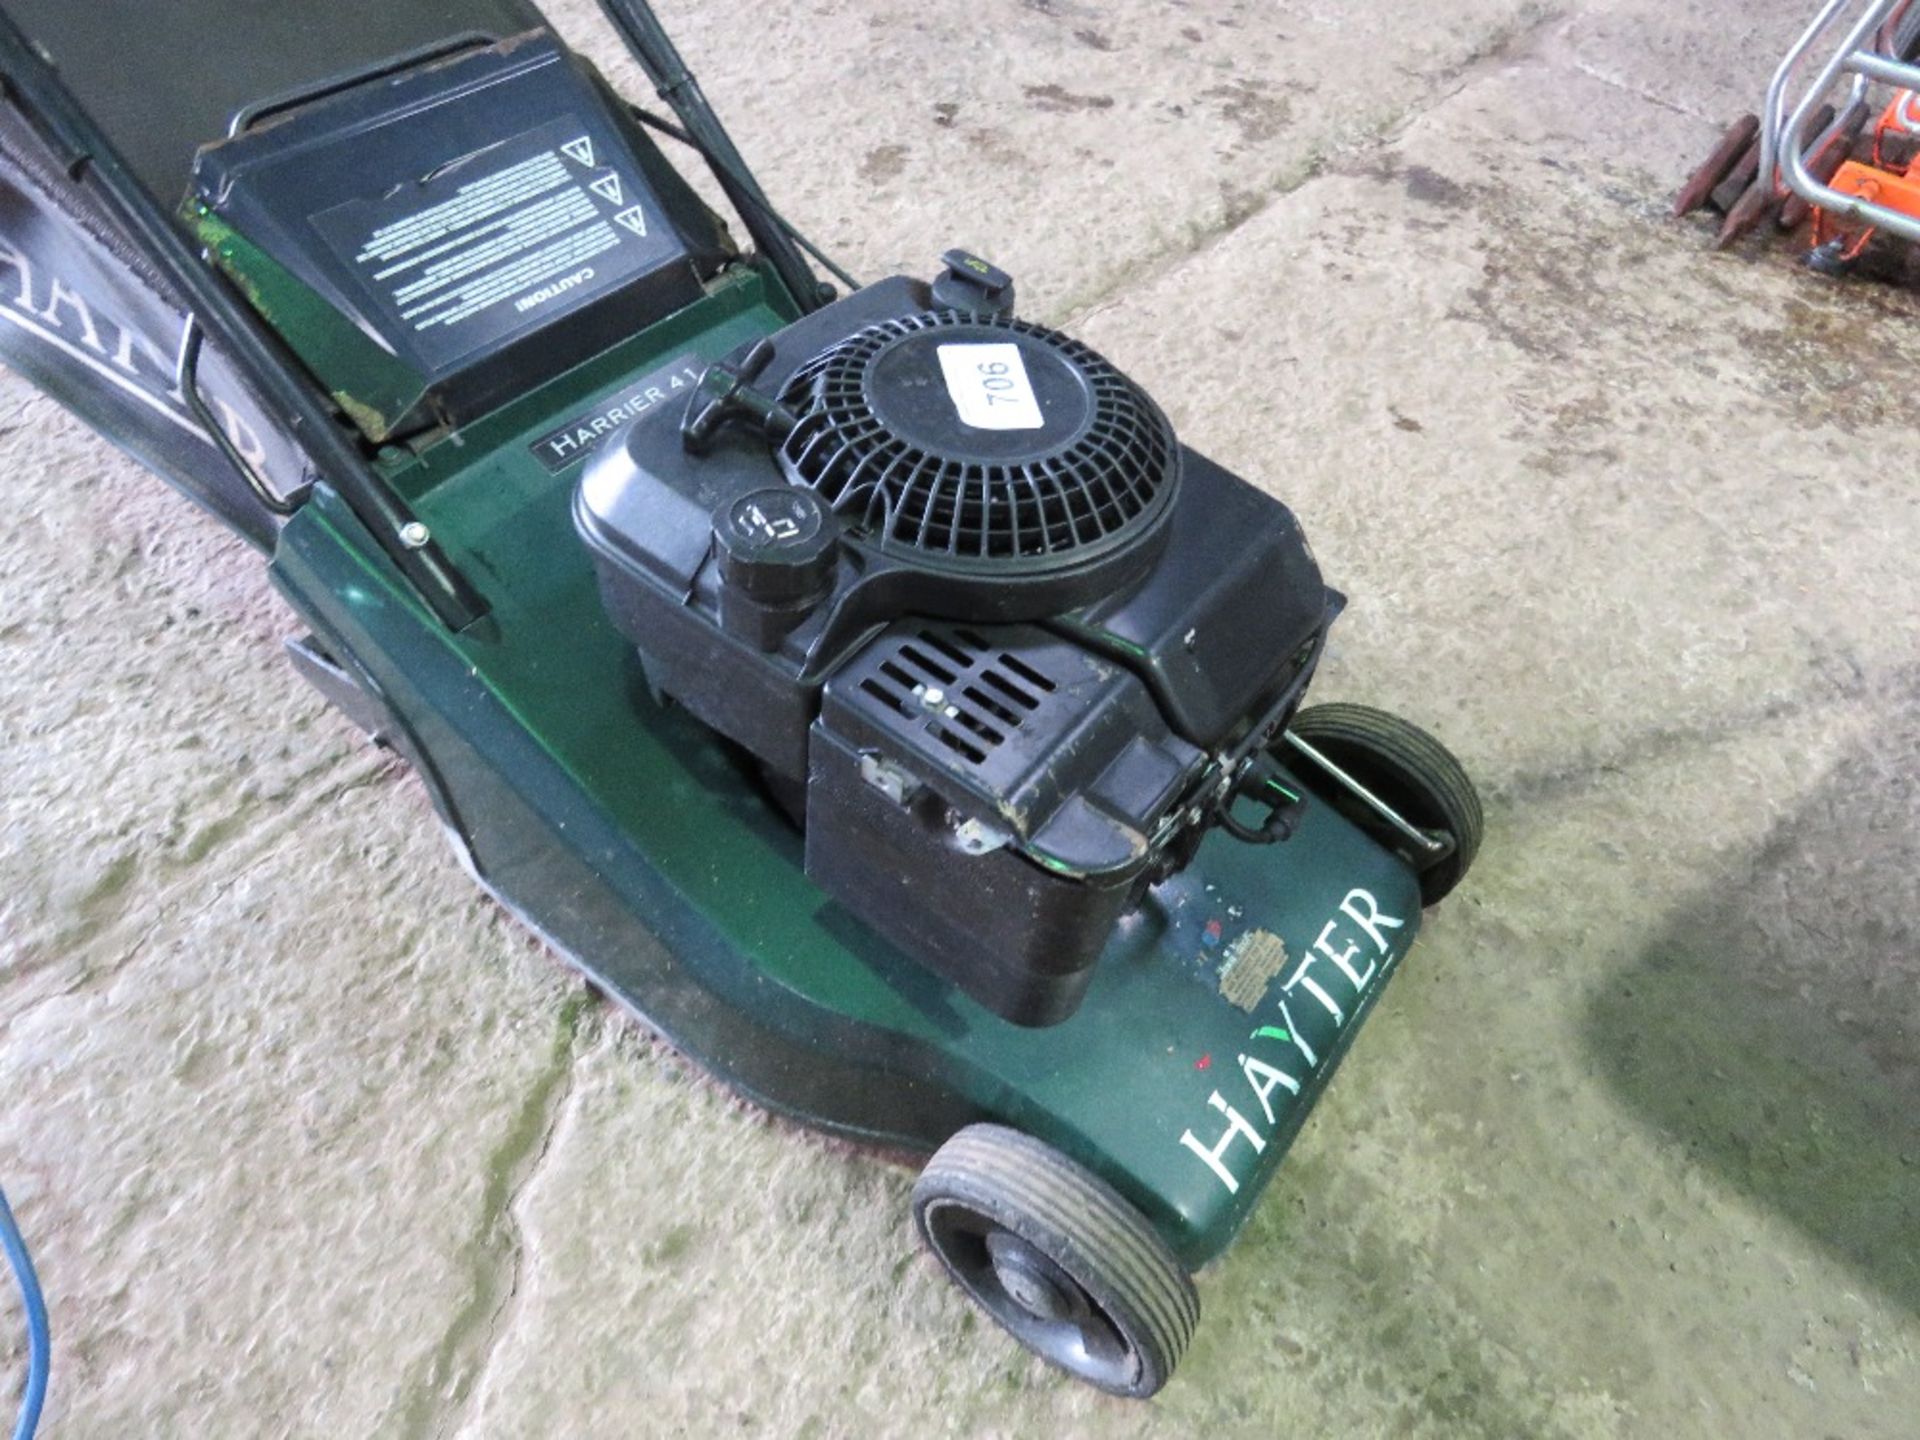 HAYTER HARRIER 41 ROLLER TYPE PETROL ENGINED LAWNMOWER, WITH COLLECTOR. THIS LOT IS SOLD UNDER T - Image 2 of 4